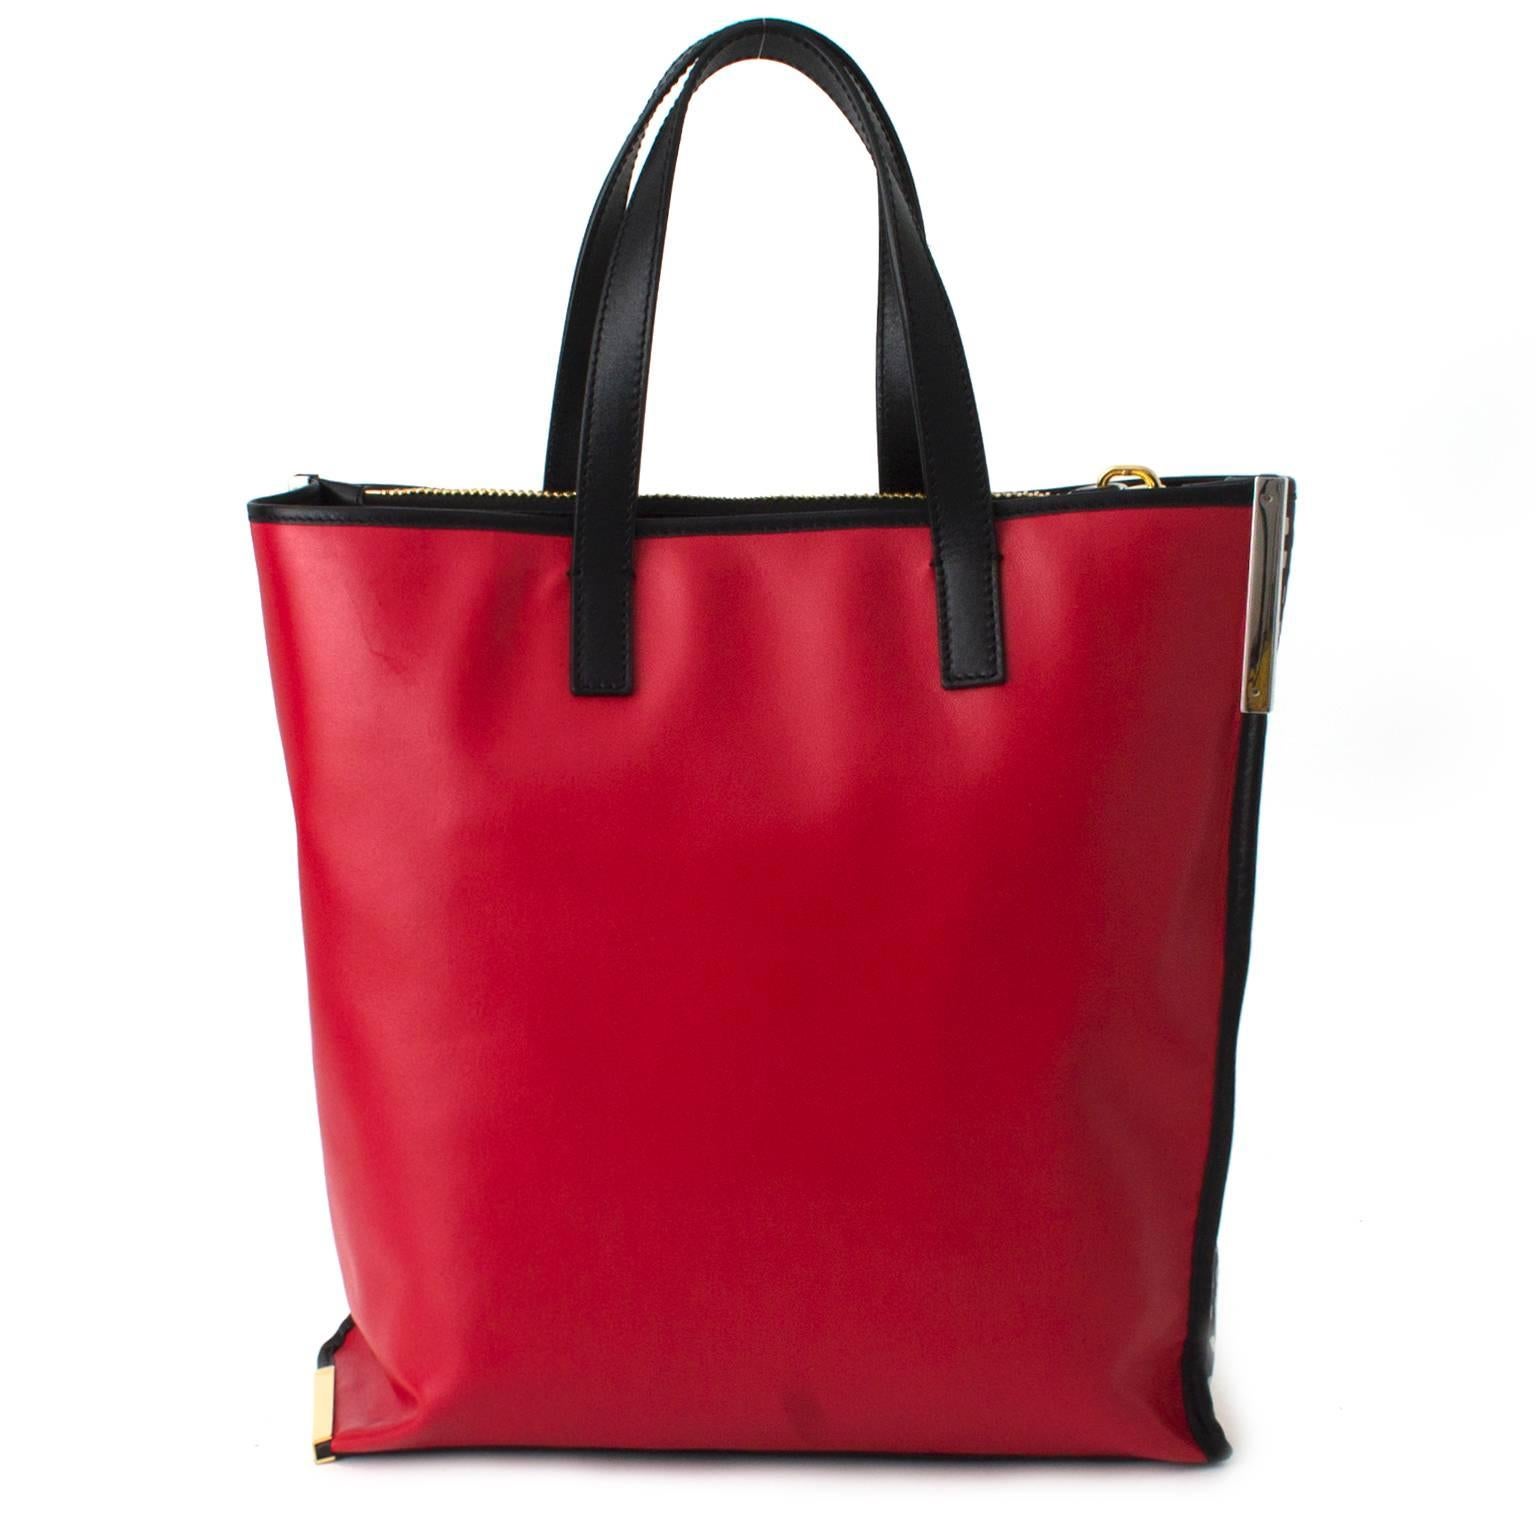 Emanuel Ungaro Black Patterned Shopper Tote.
Black, white and red calf leather  shopper tote featuring top handles, a metallic logo stamp,  one zipper department and two open departmens. 